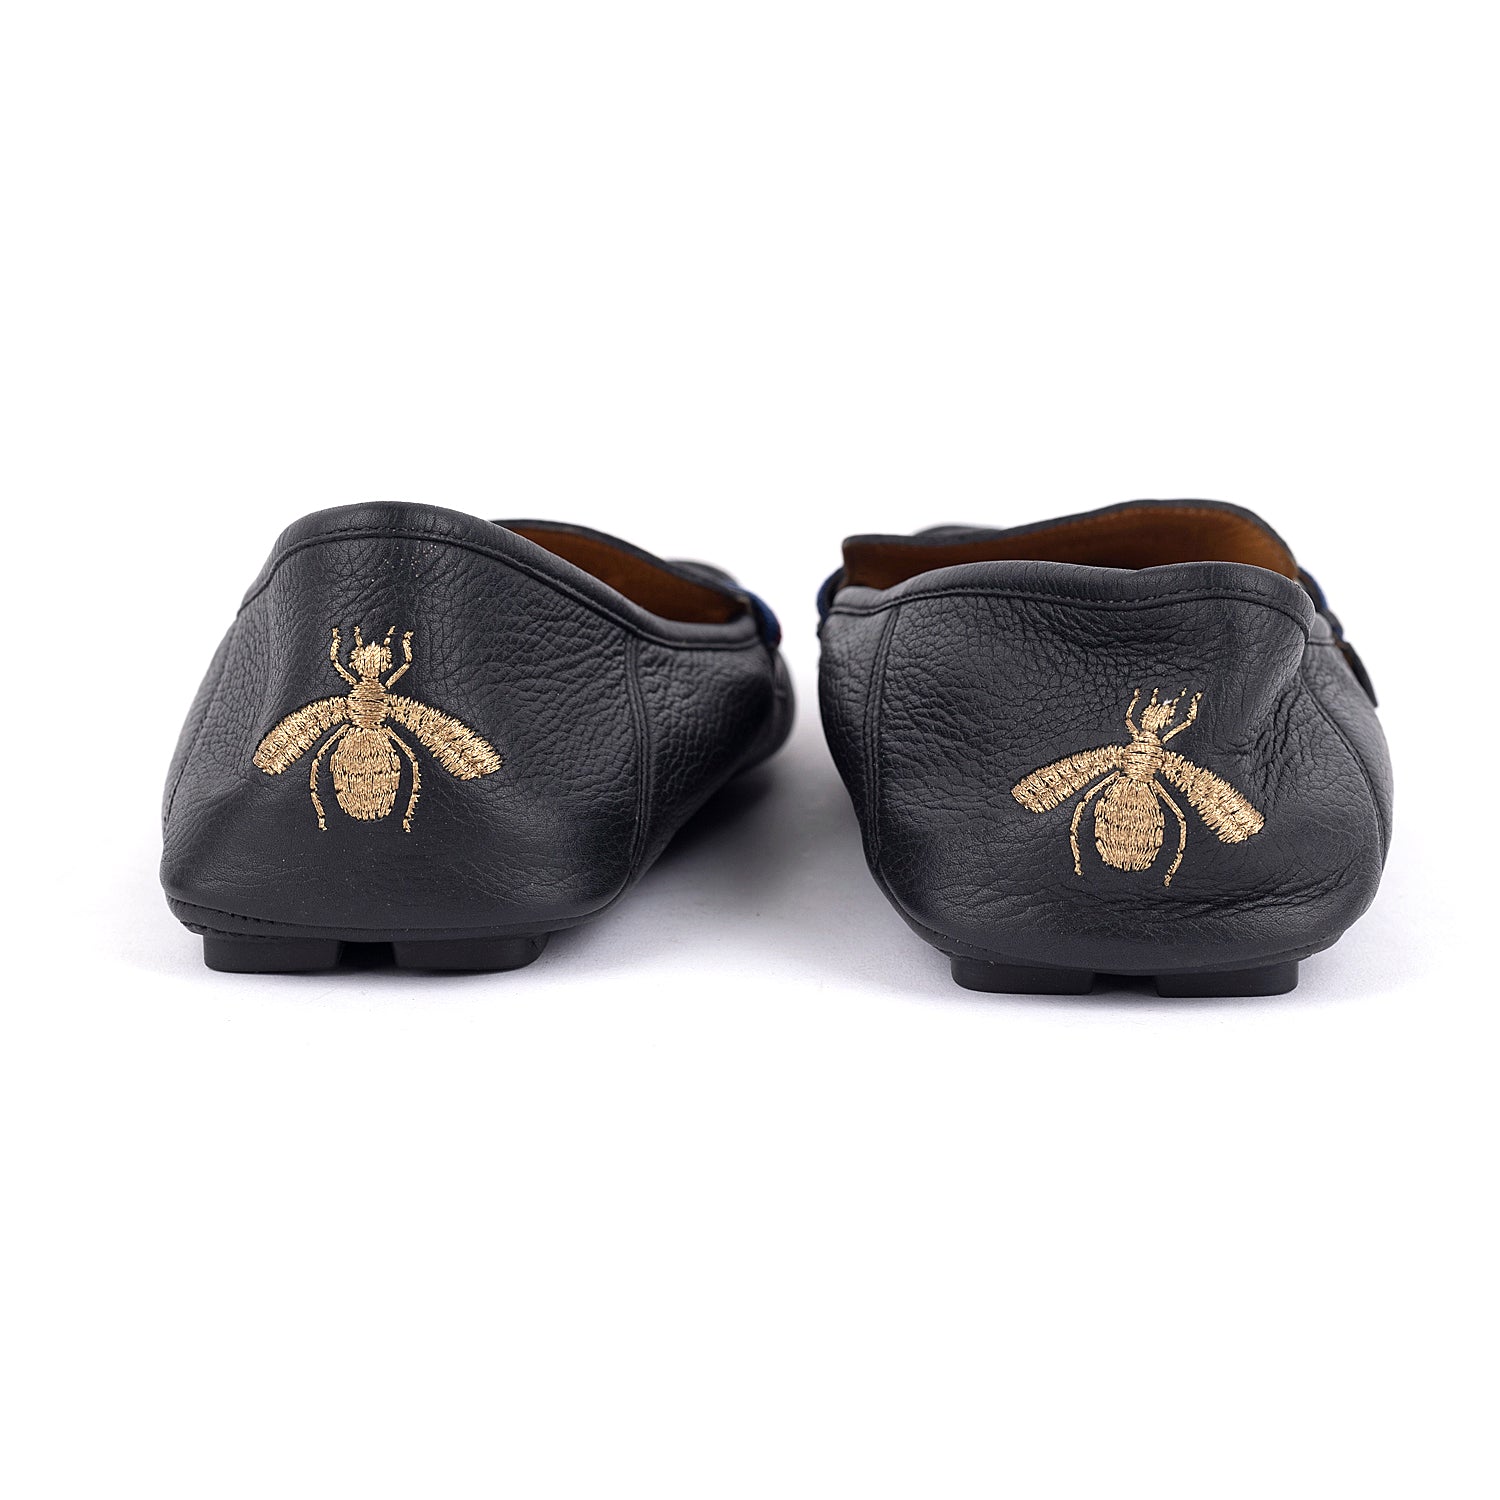 Cuir Web Stripes Bee Moccasins Shoes